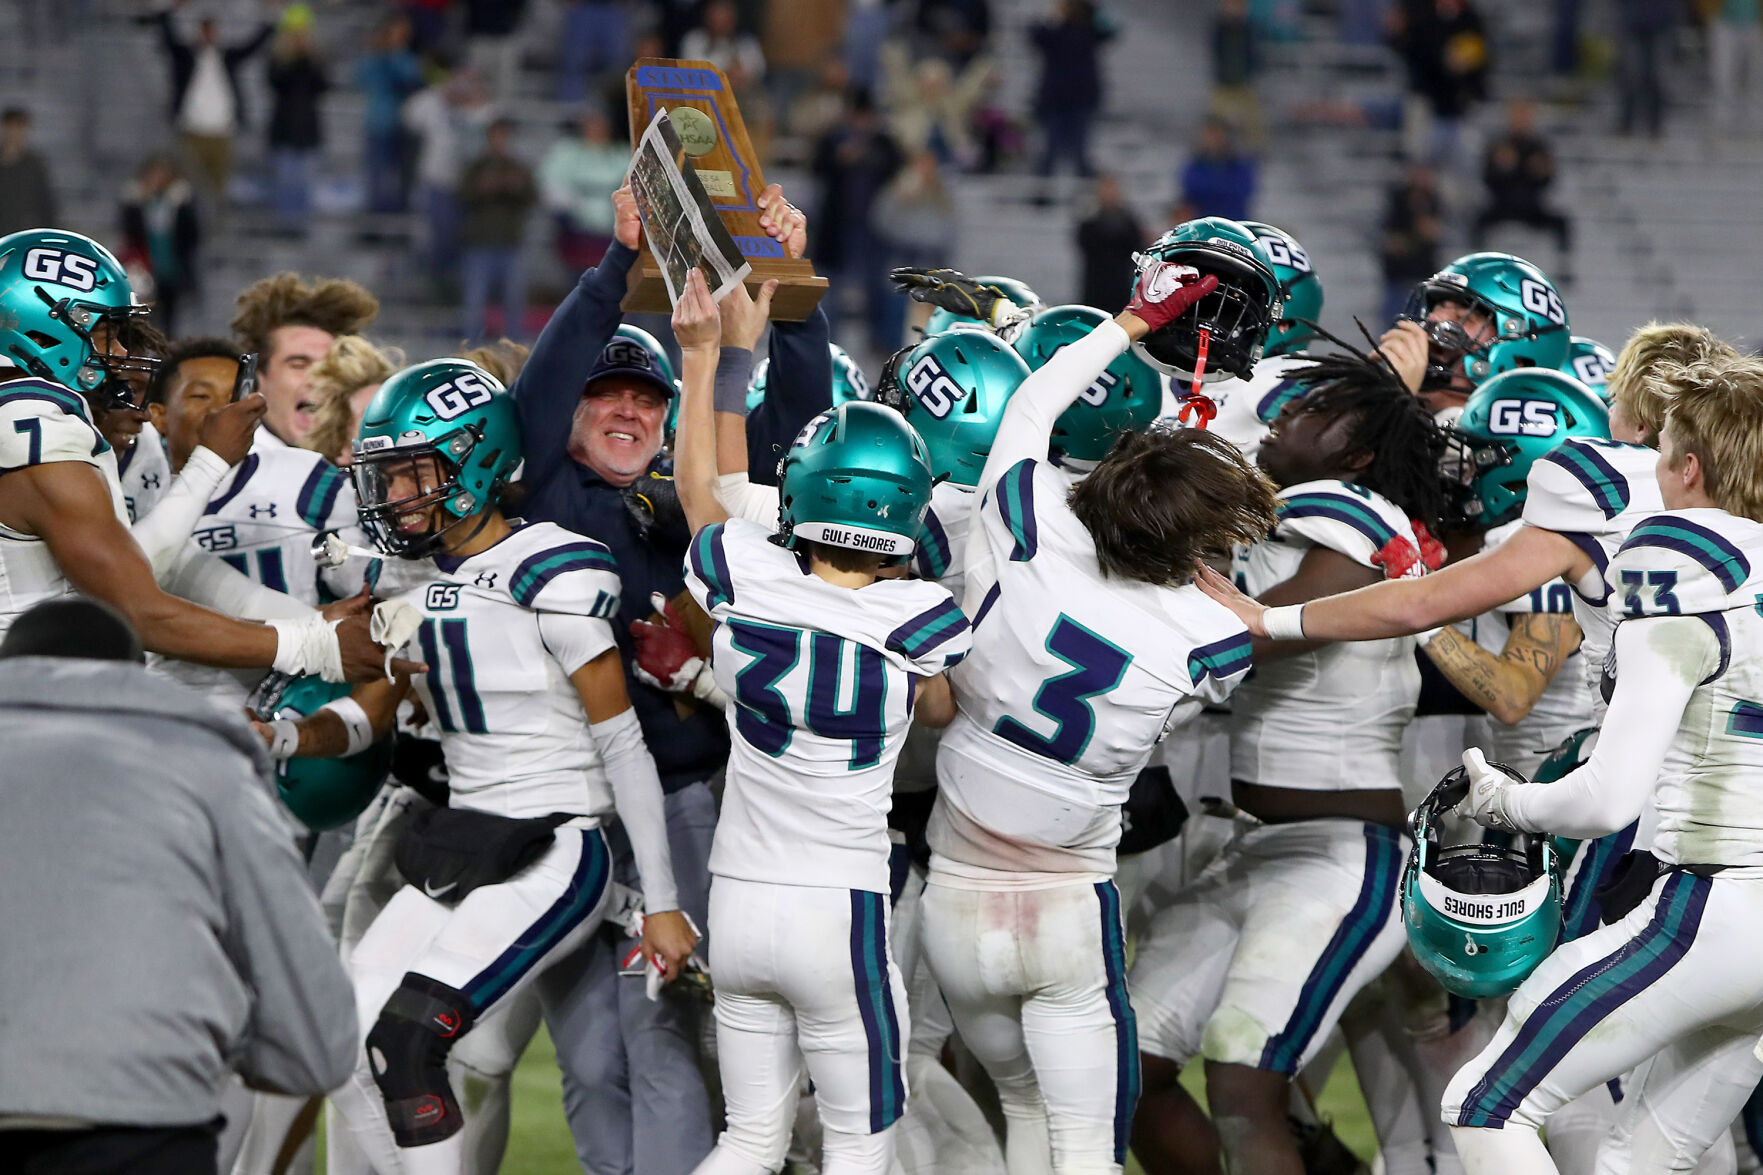 Gulf Shores Makes History with Undefeated Season, Wins Class 5A Football State Title!